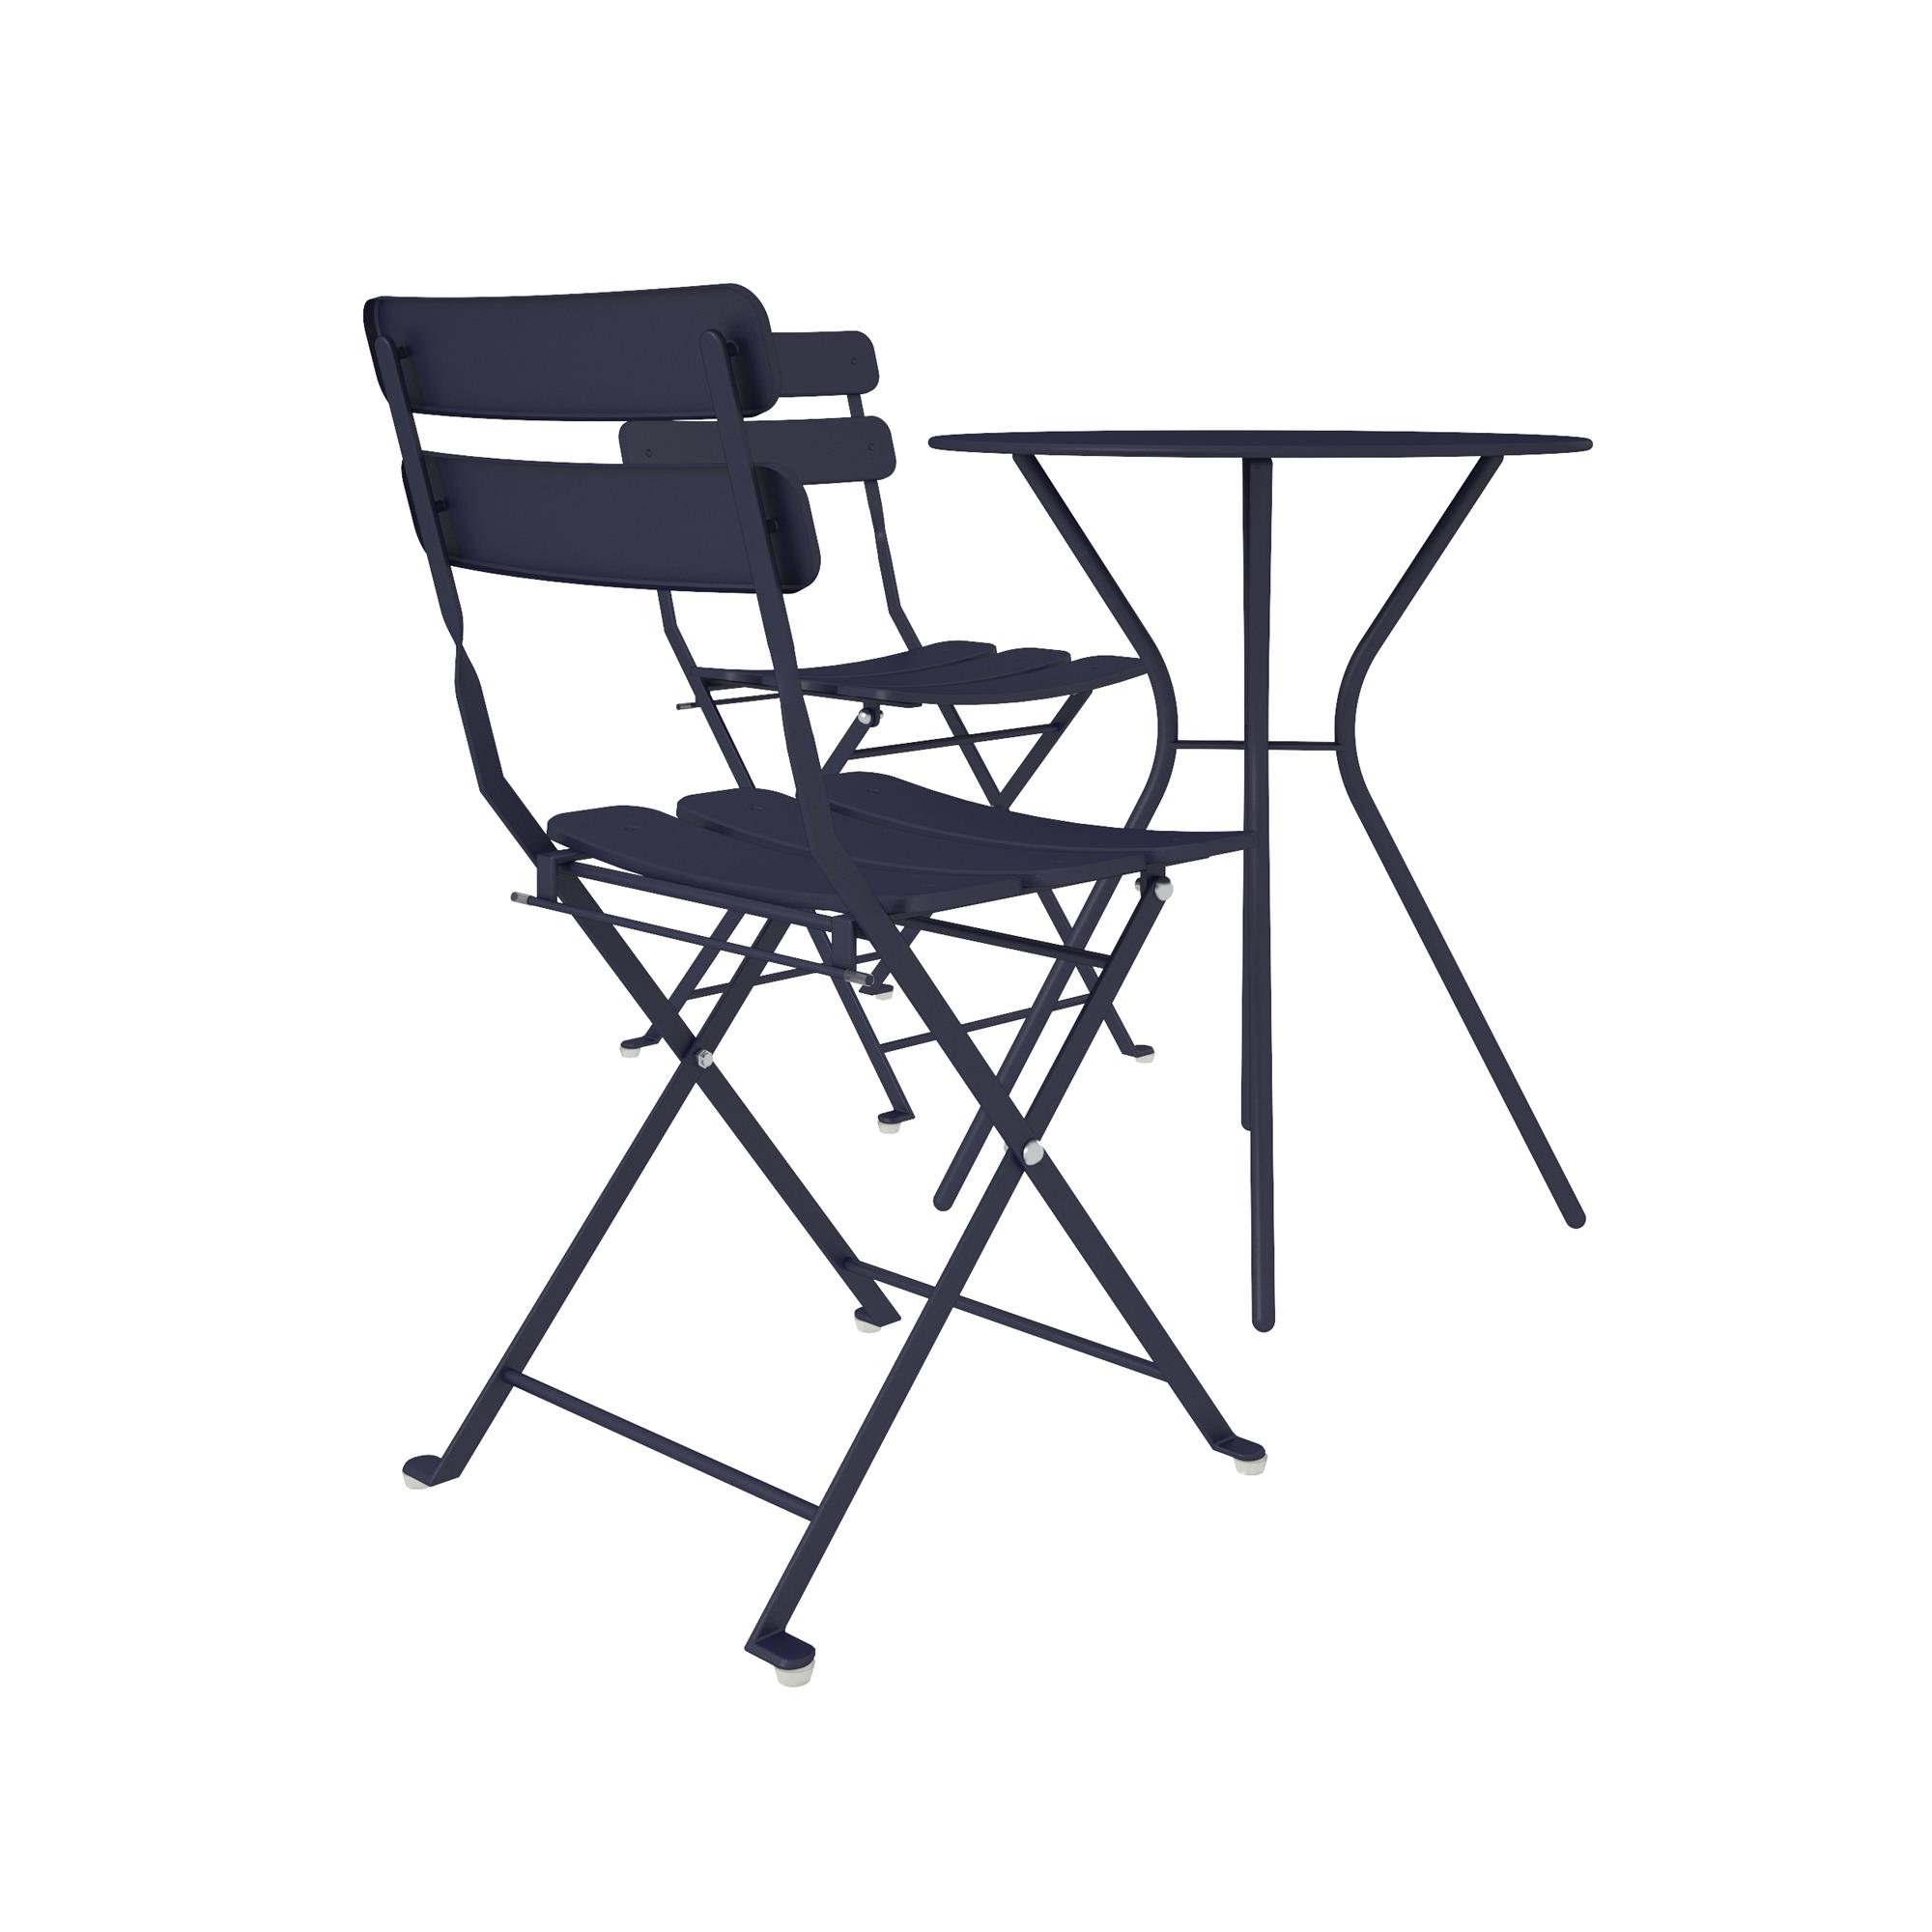 COSCO Outdoor Living, 3 Piece Bistro Set with 2 Folding Chairs, Navy - image 5 of 7